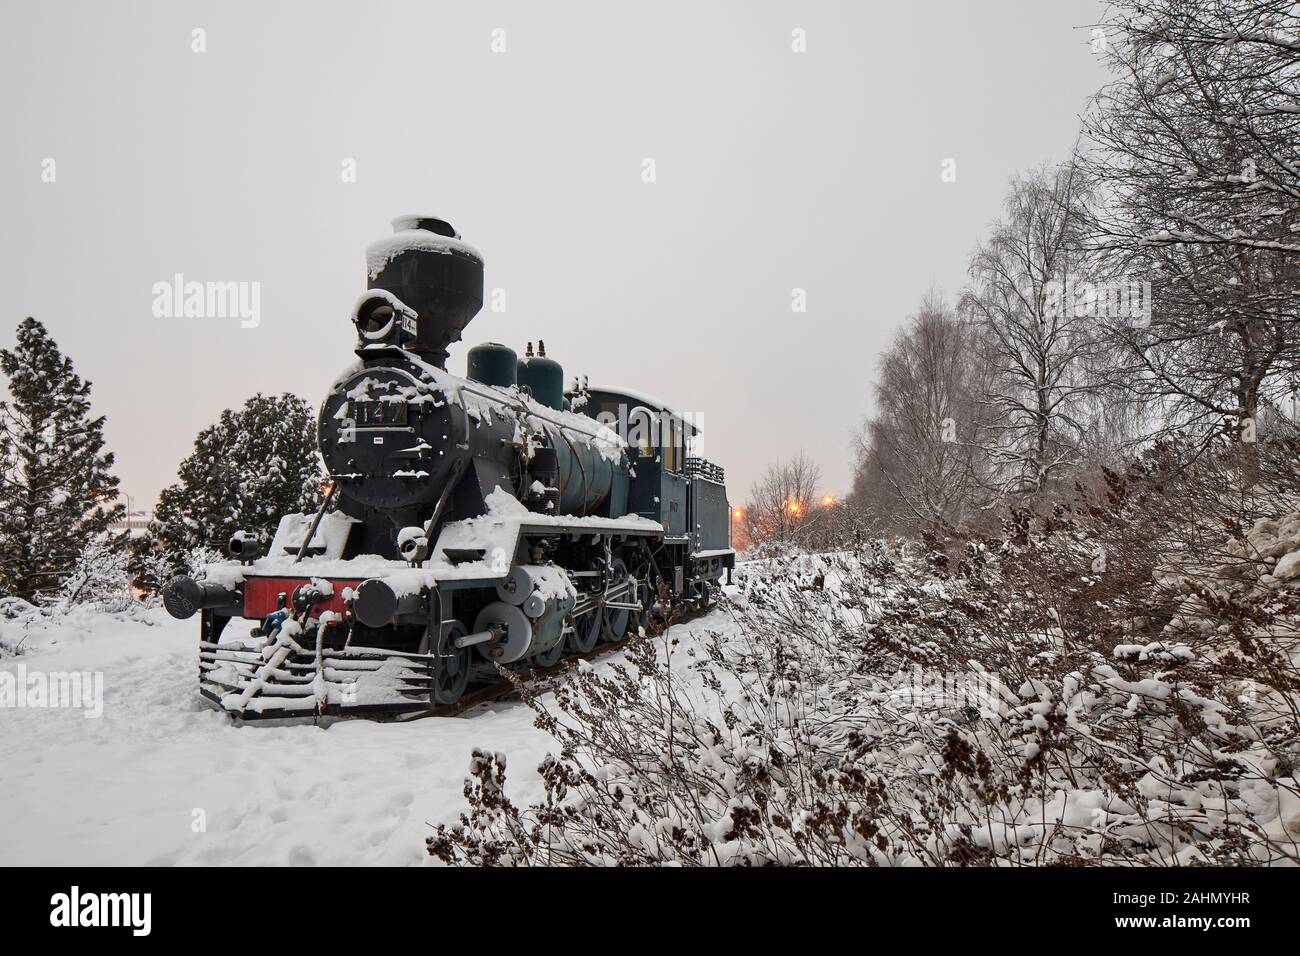 Finnish Rovaniemi a city in Finland and the region of Lapland  Static display Steam Locomotive VR Class Tk3 1147 at Rovaniemi railway station Stock Photo